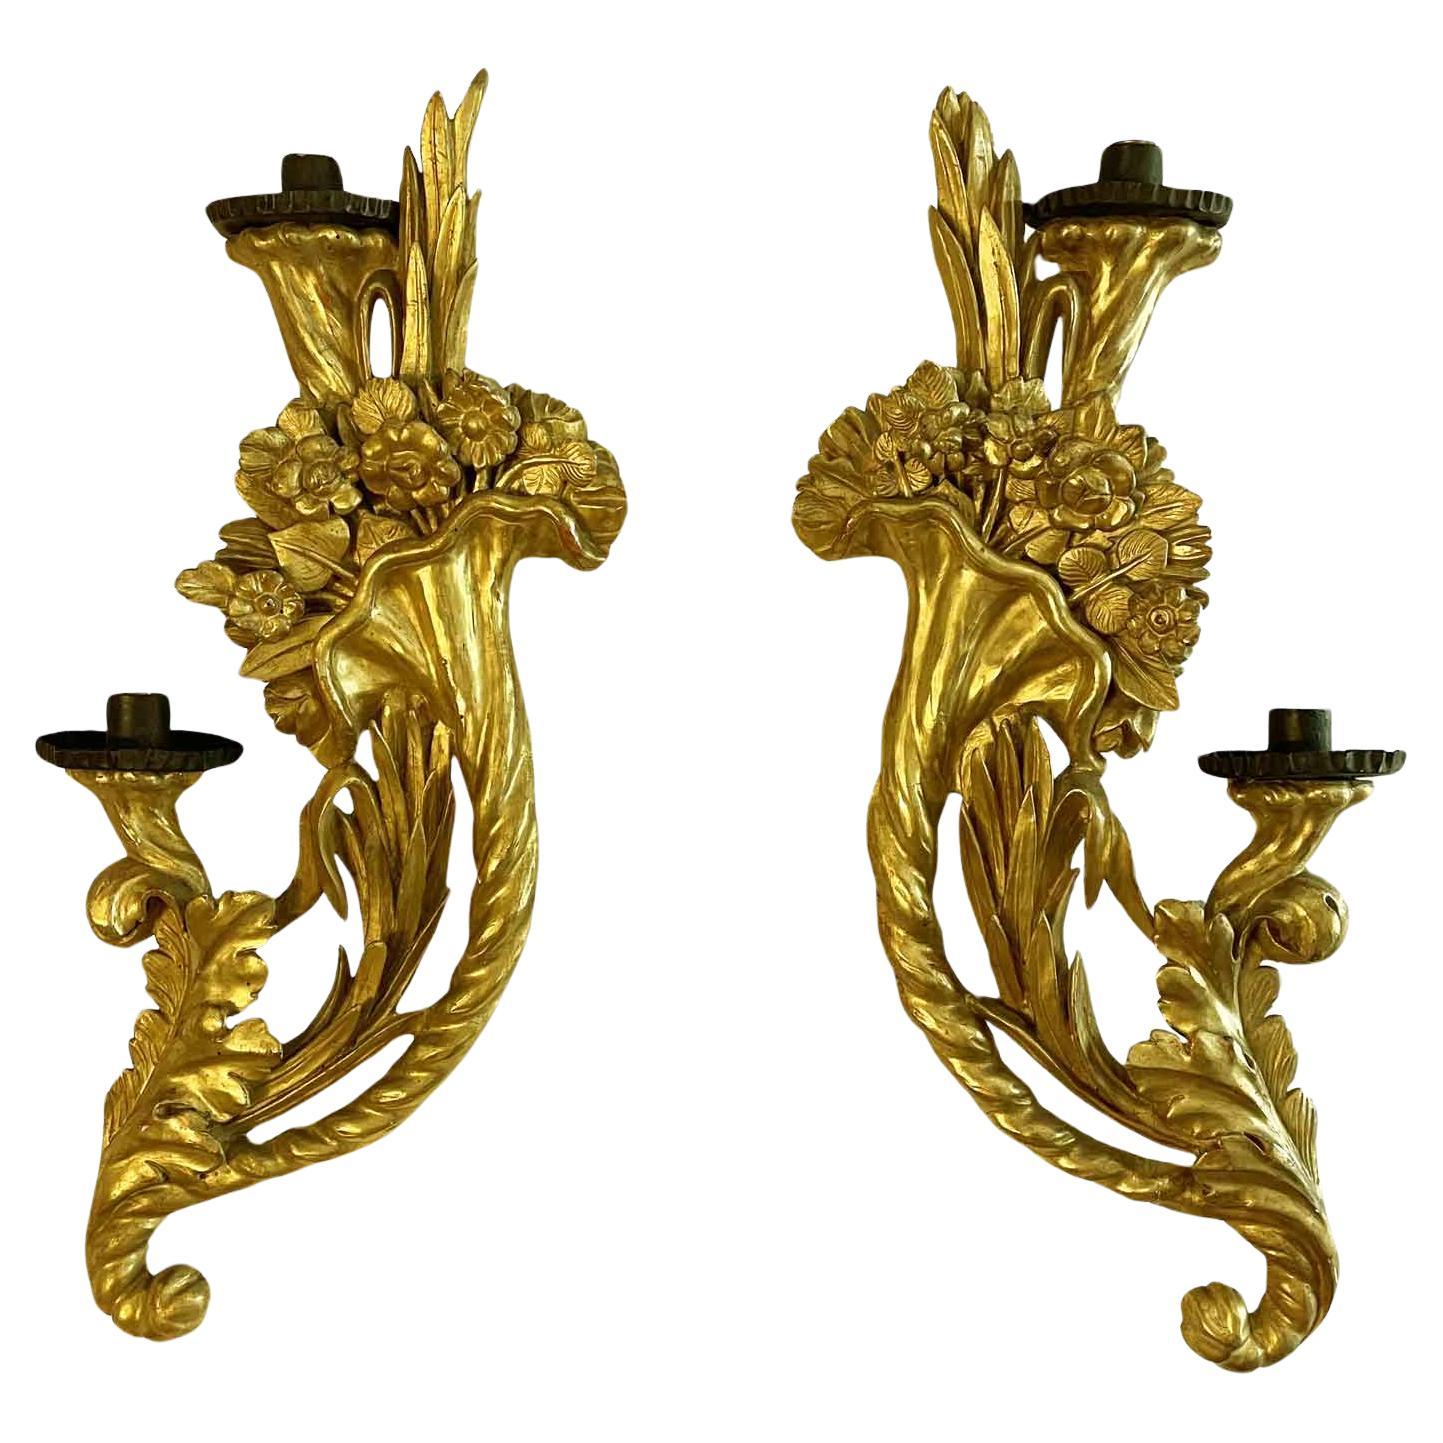 Pair of Gilded Italian Appliques 1750 Cornucopia Intaglio with Flowers and Leaves  For Sale